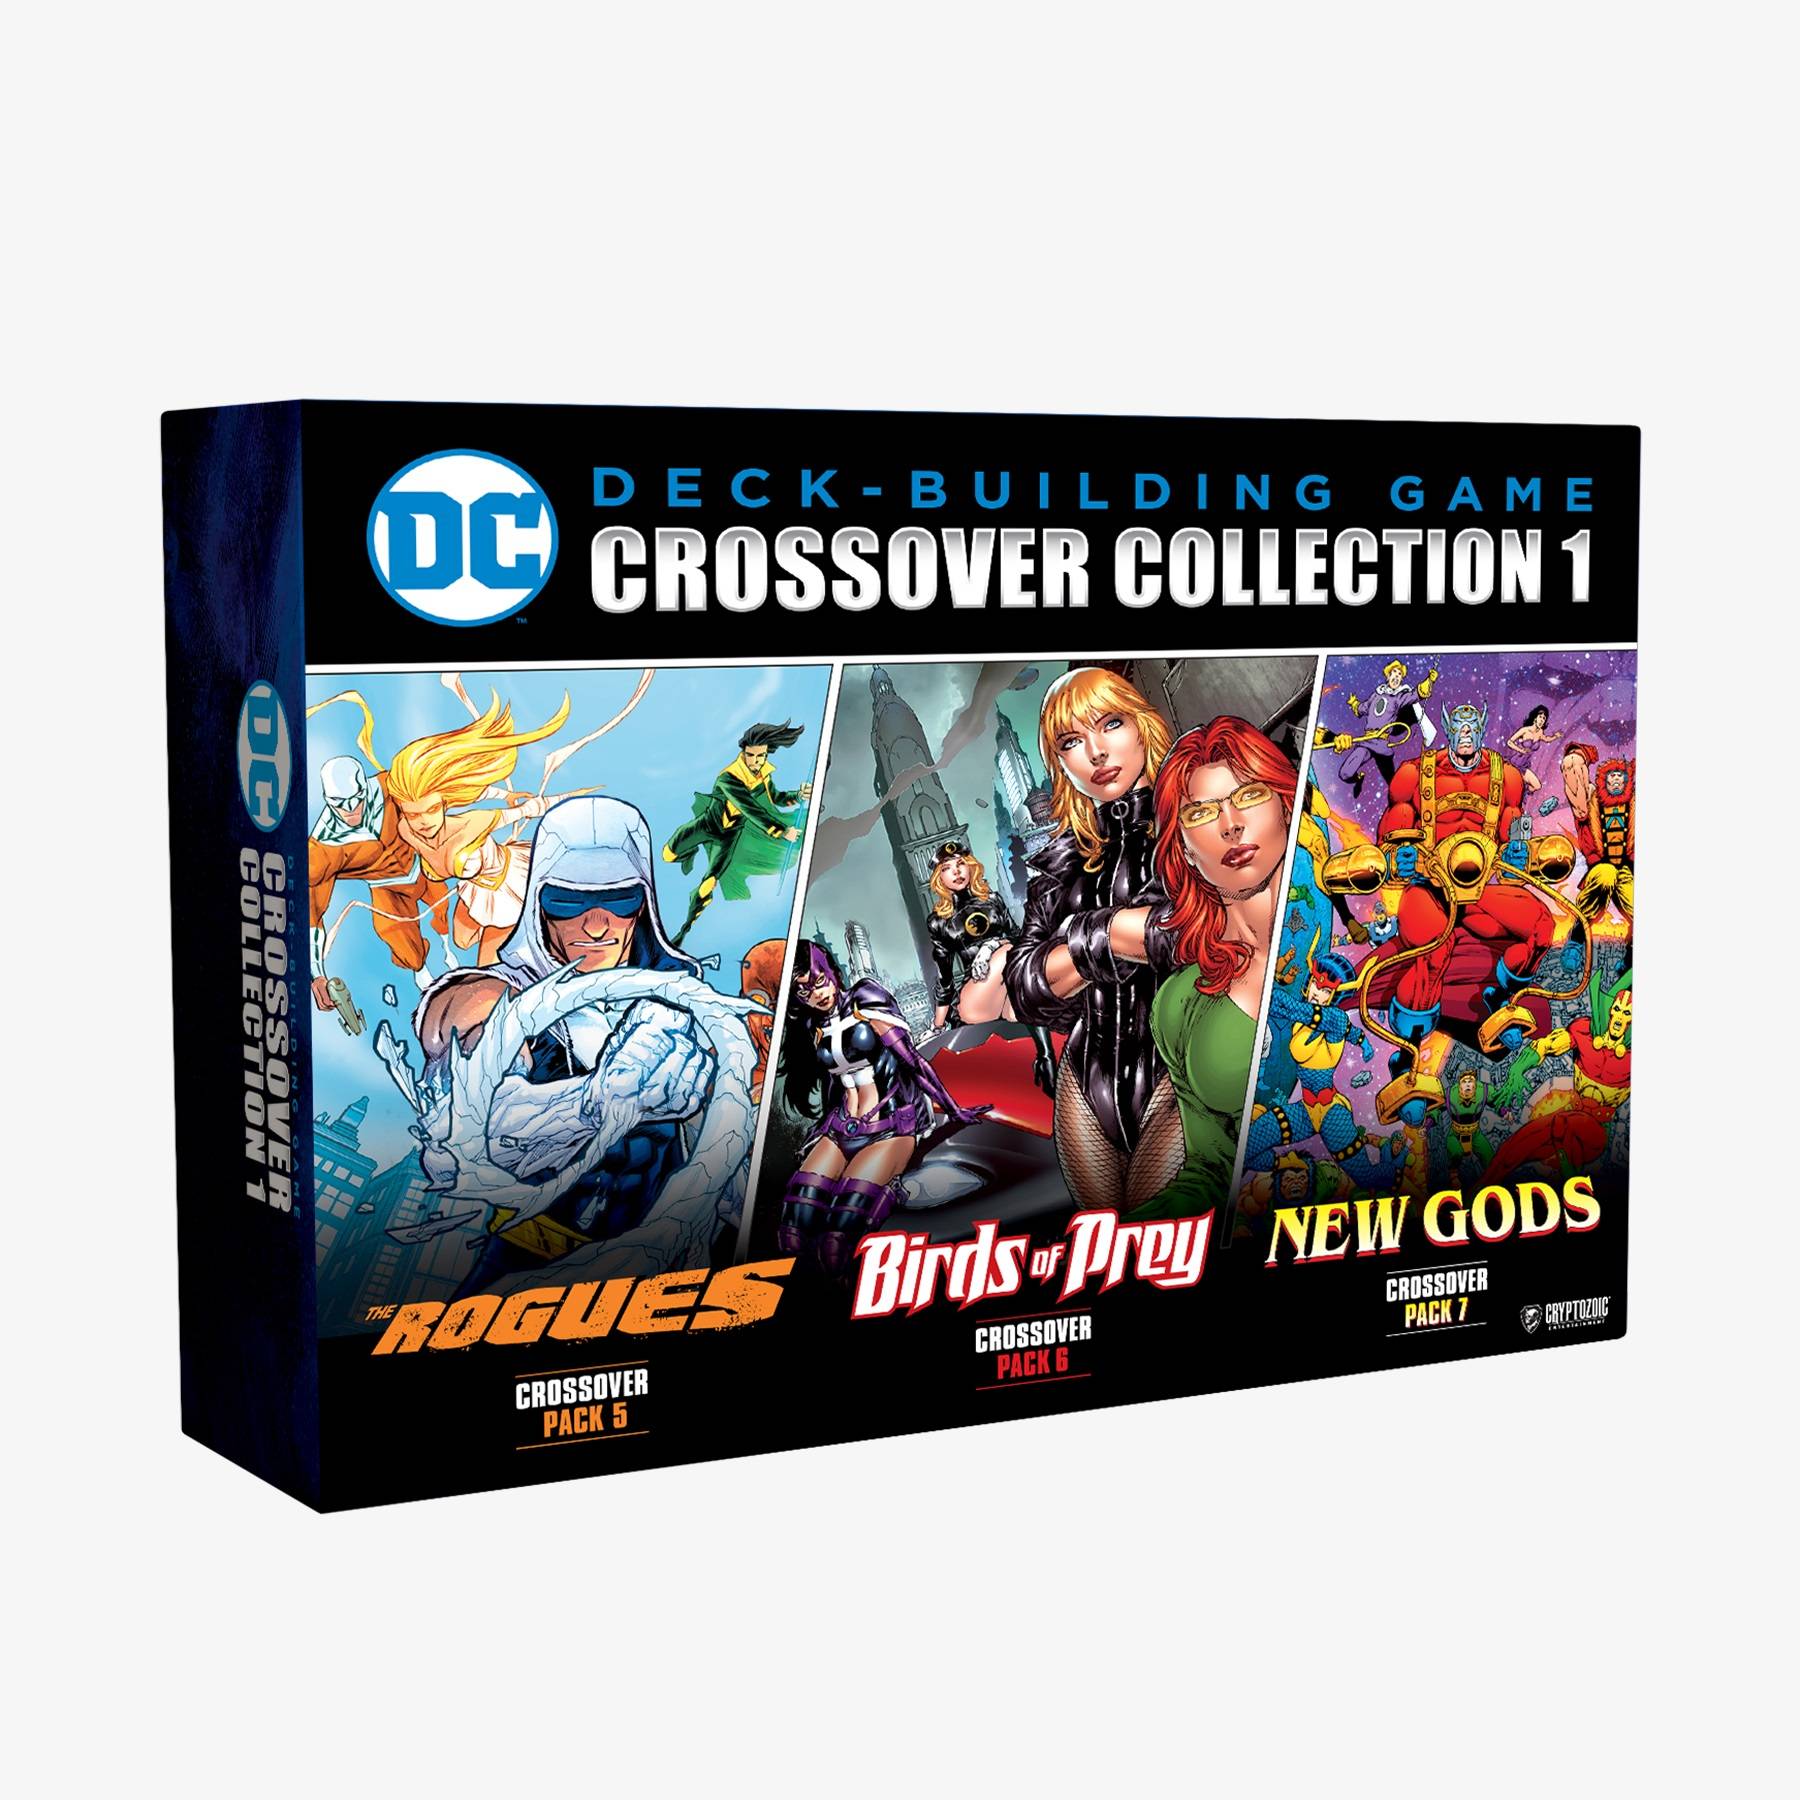 DC Deck-Building Game: Crossover Collection 1... Available Now!